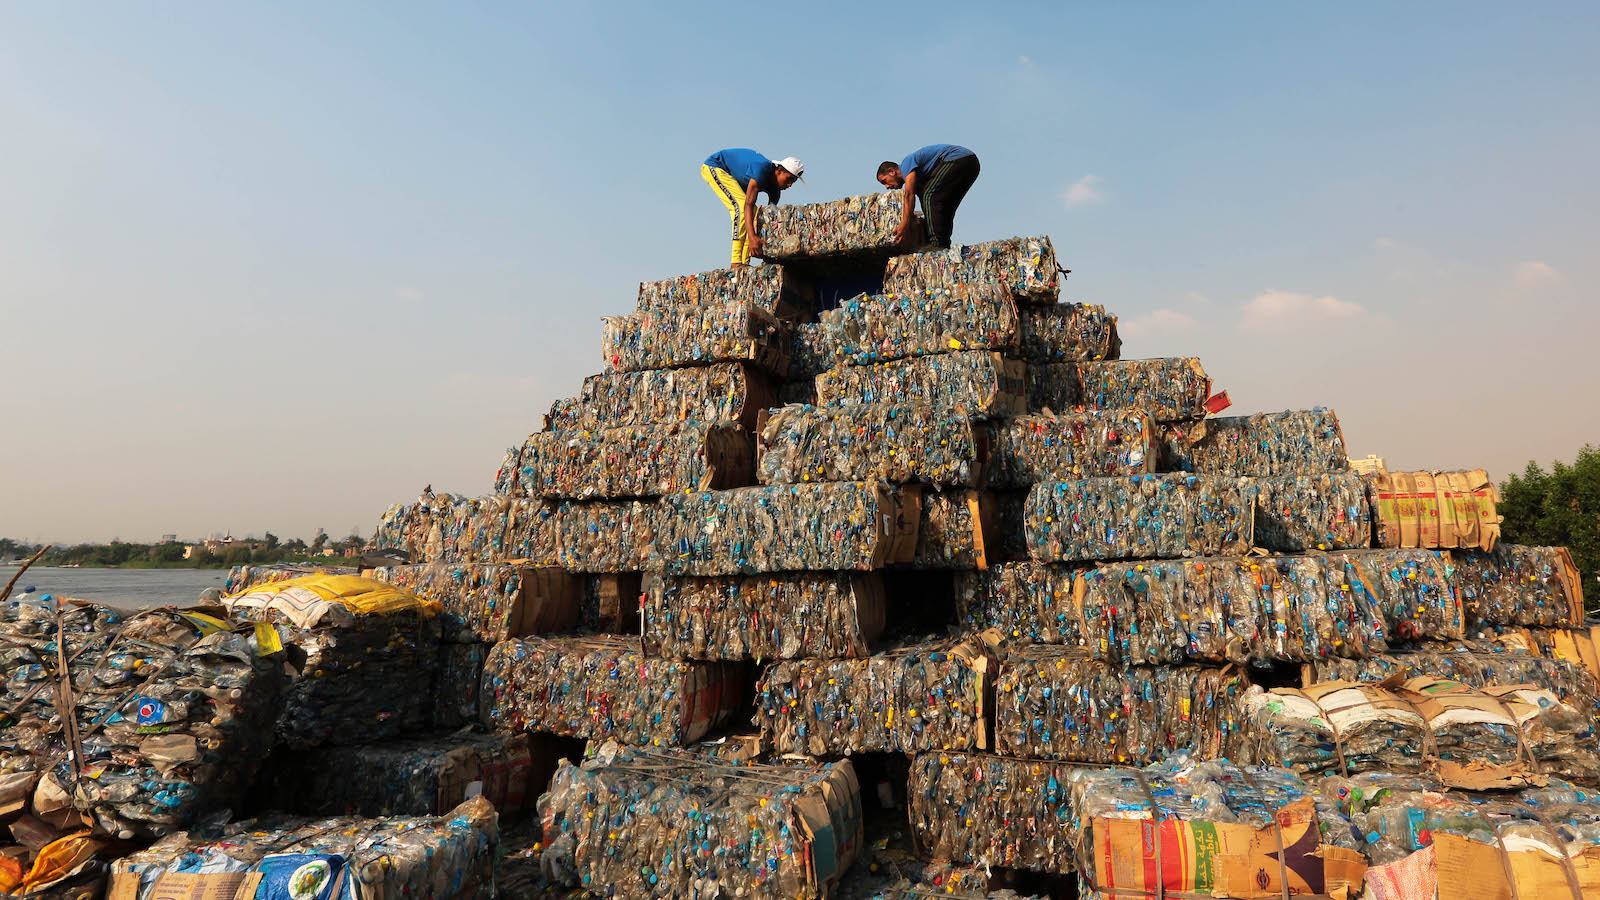 Two people lift blocks of plastic on top of a pyramid made of trash